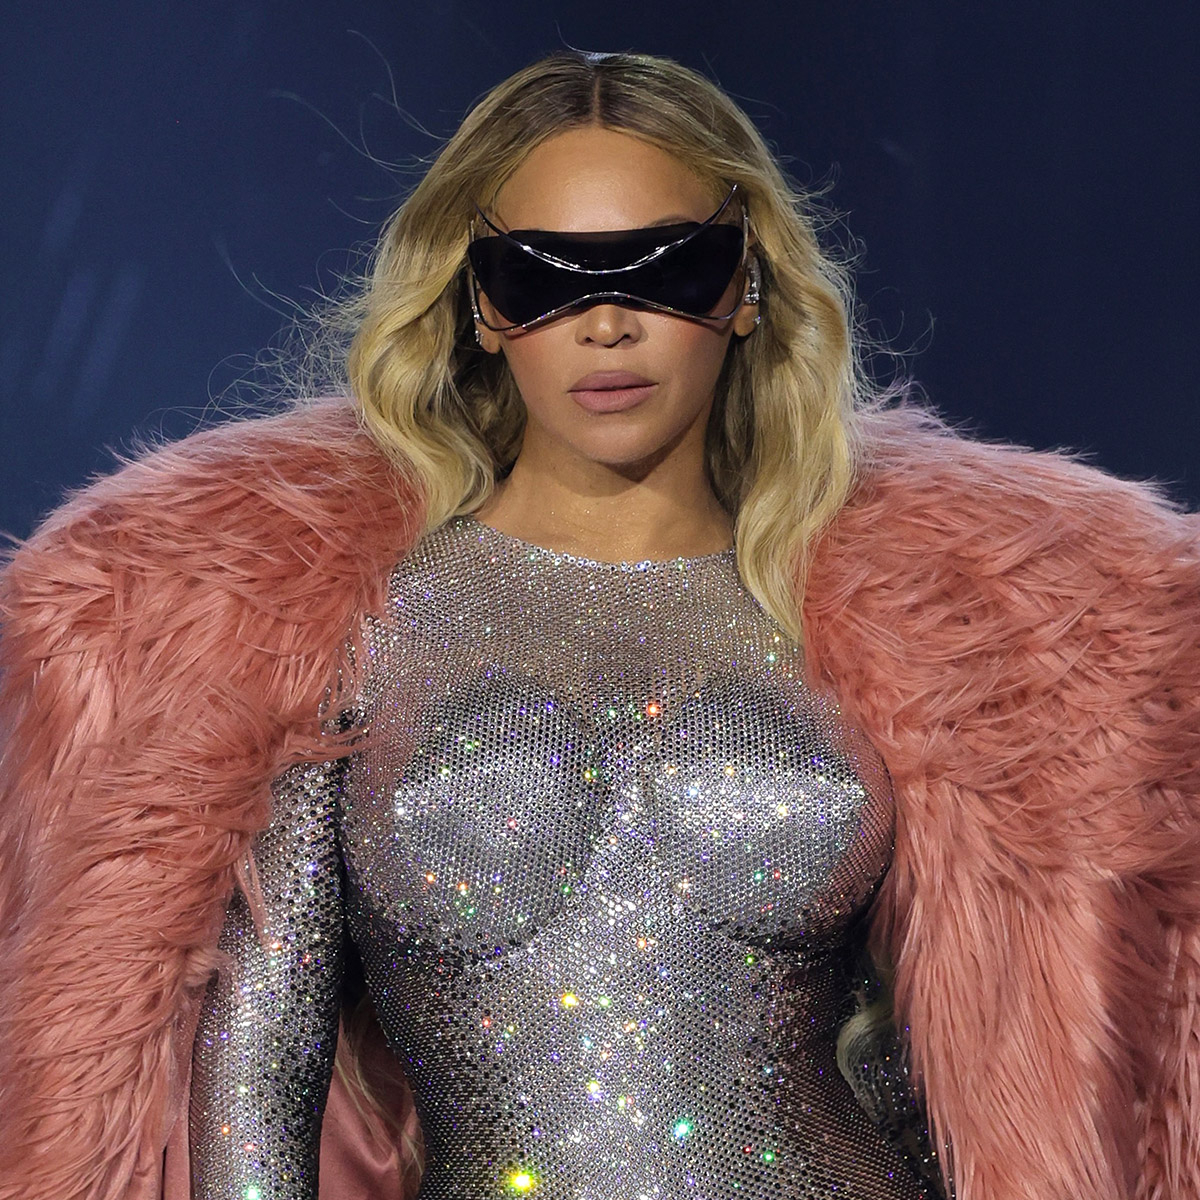 Beyoncé gives rare glimpse into private life in first Vogue cover story  shot by black photographer